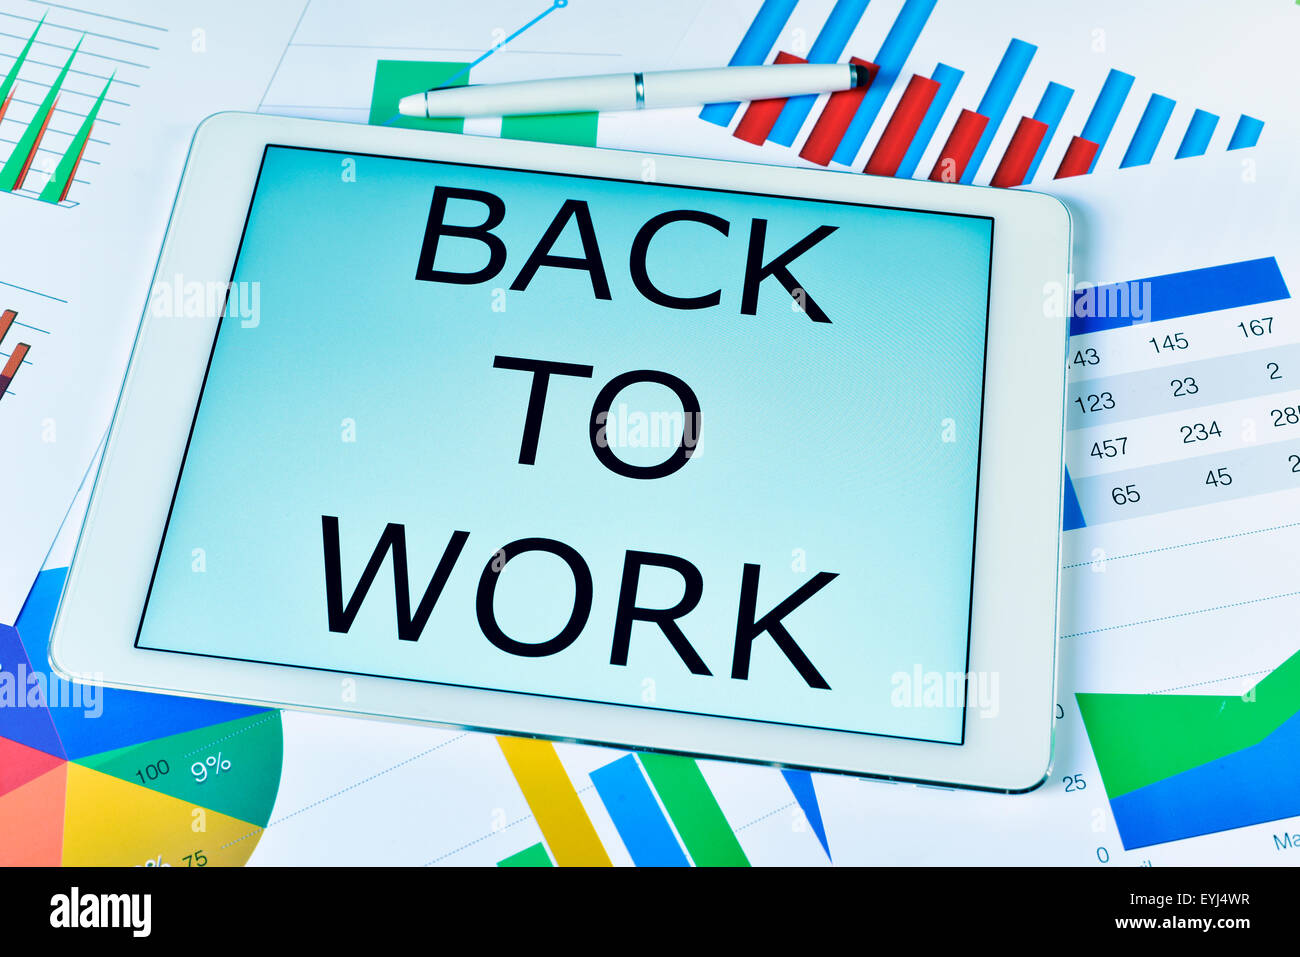 the text back to work in a tablet computer, placed on an office desk full of charts Stock Photo